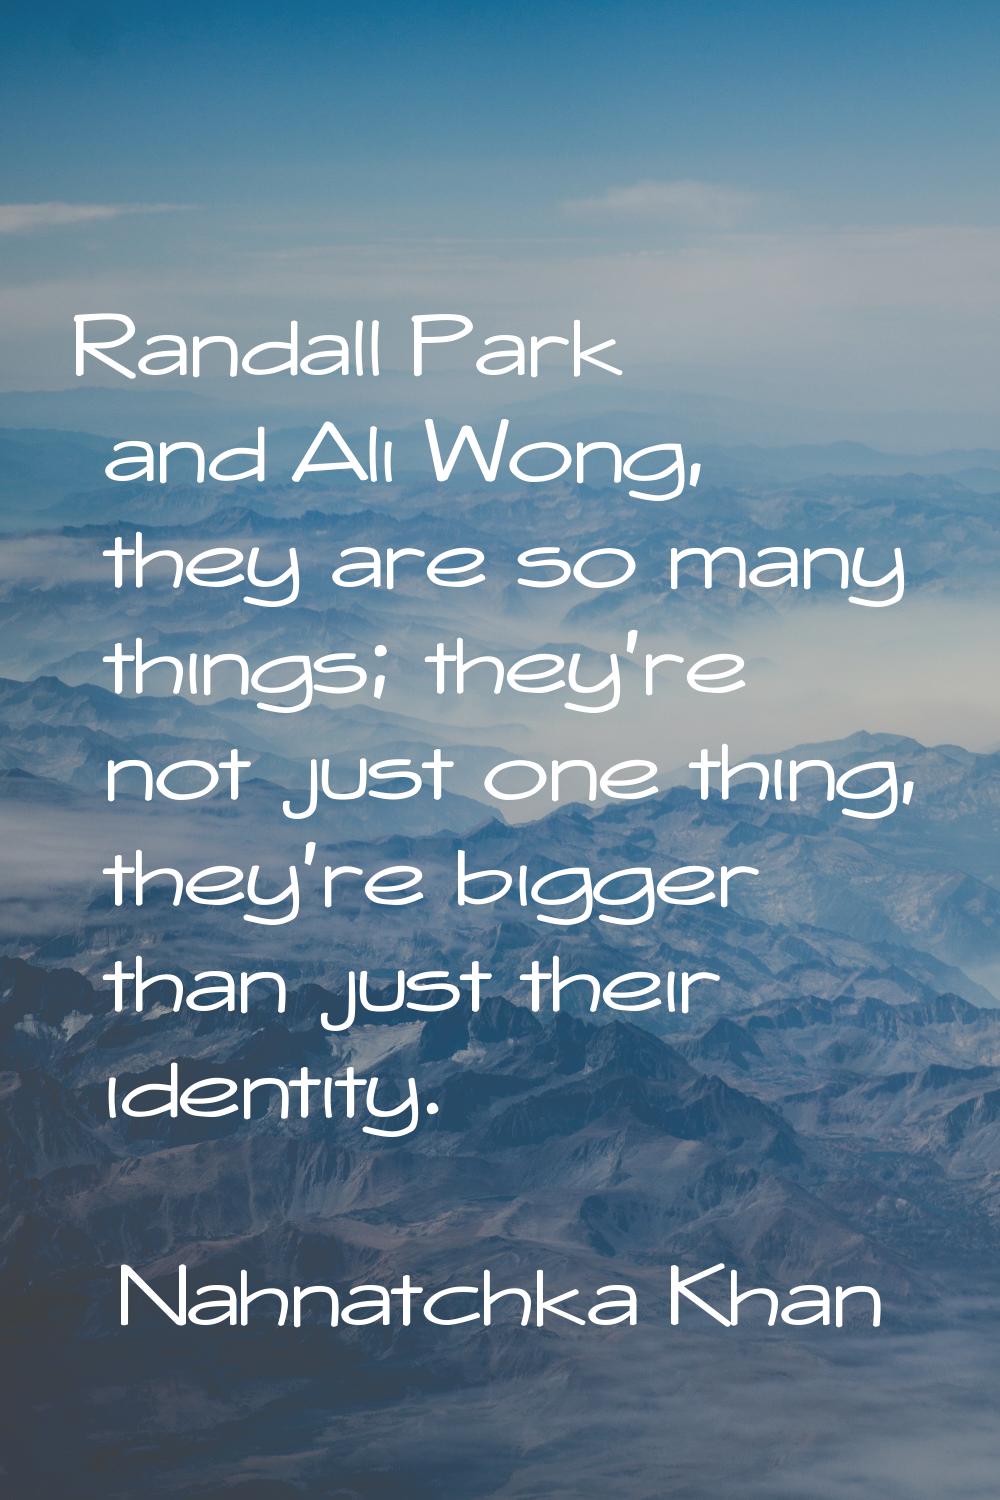 Randall Park and Ali Wong, they are so many things; they're not just one thing, they're bigger than